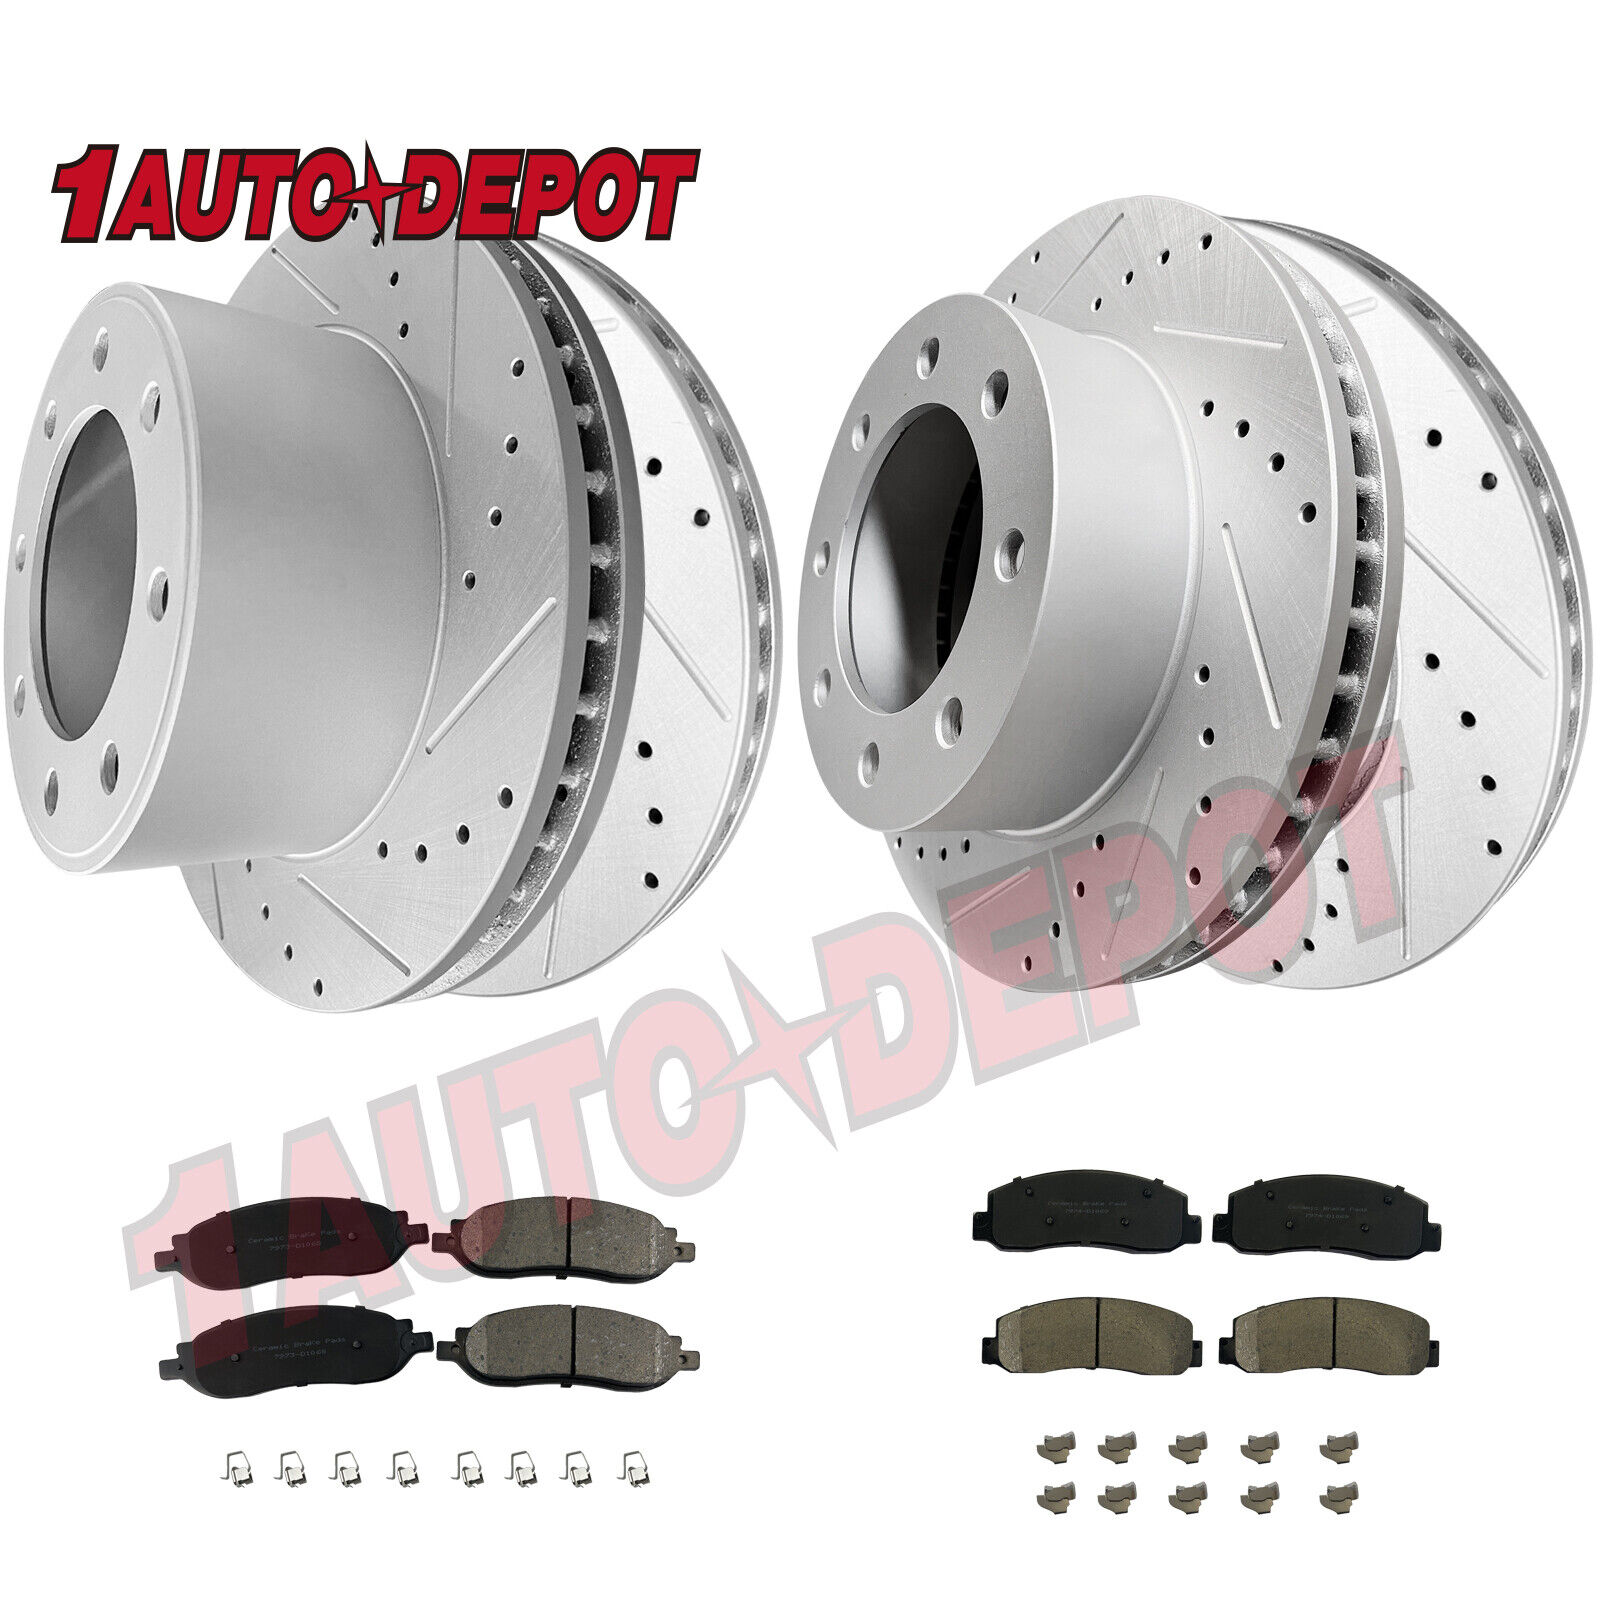 4WD Front & Rear Drilled Brake Rotors + Pads Kit for Ford F-250 F-350 Super Duty